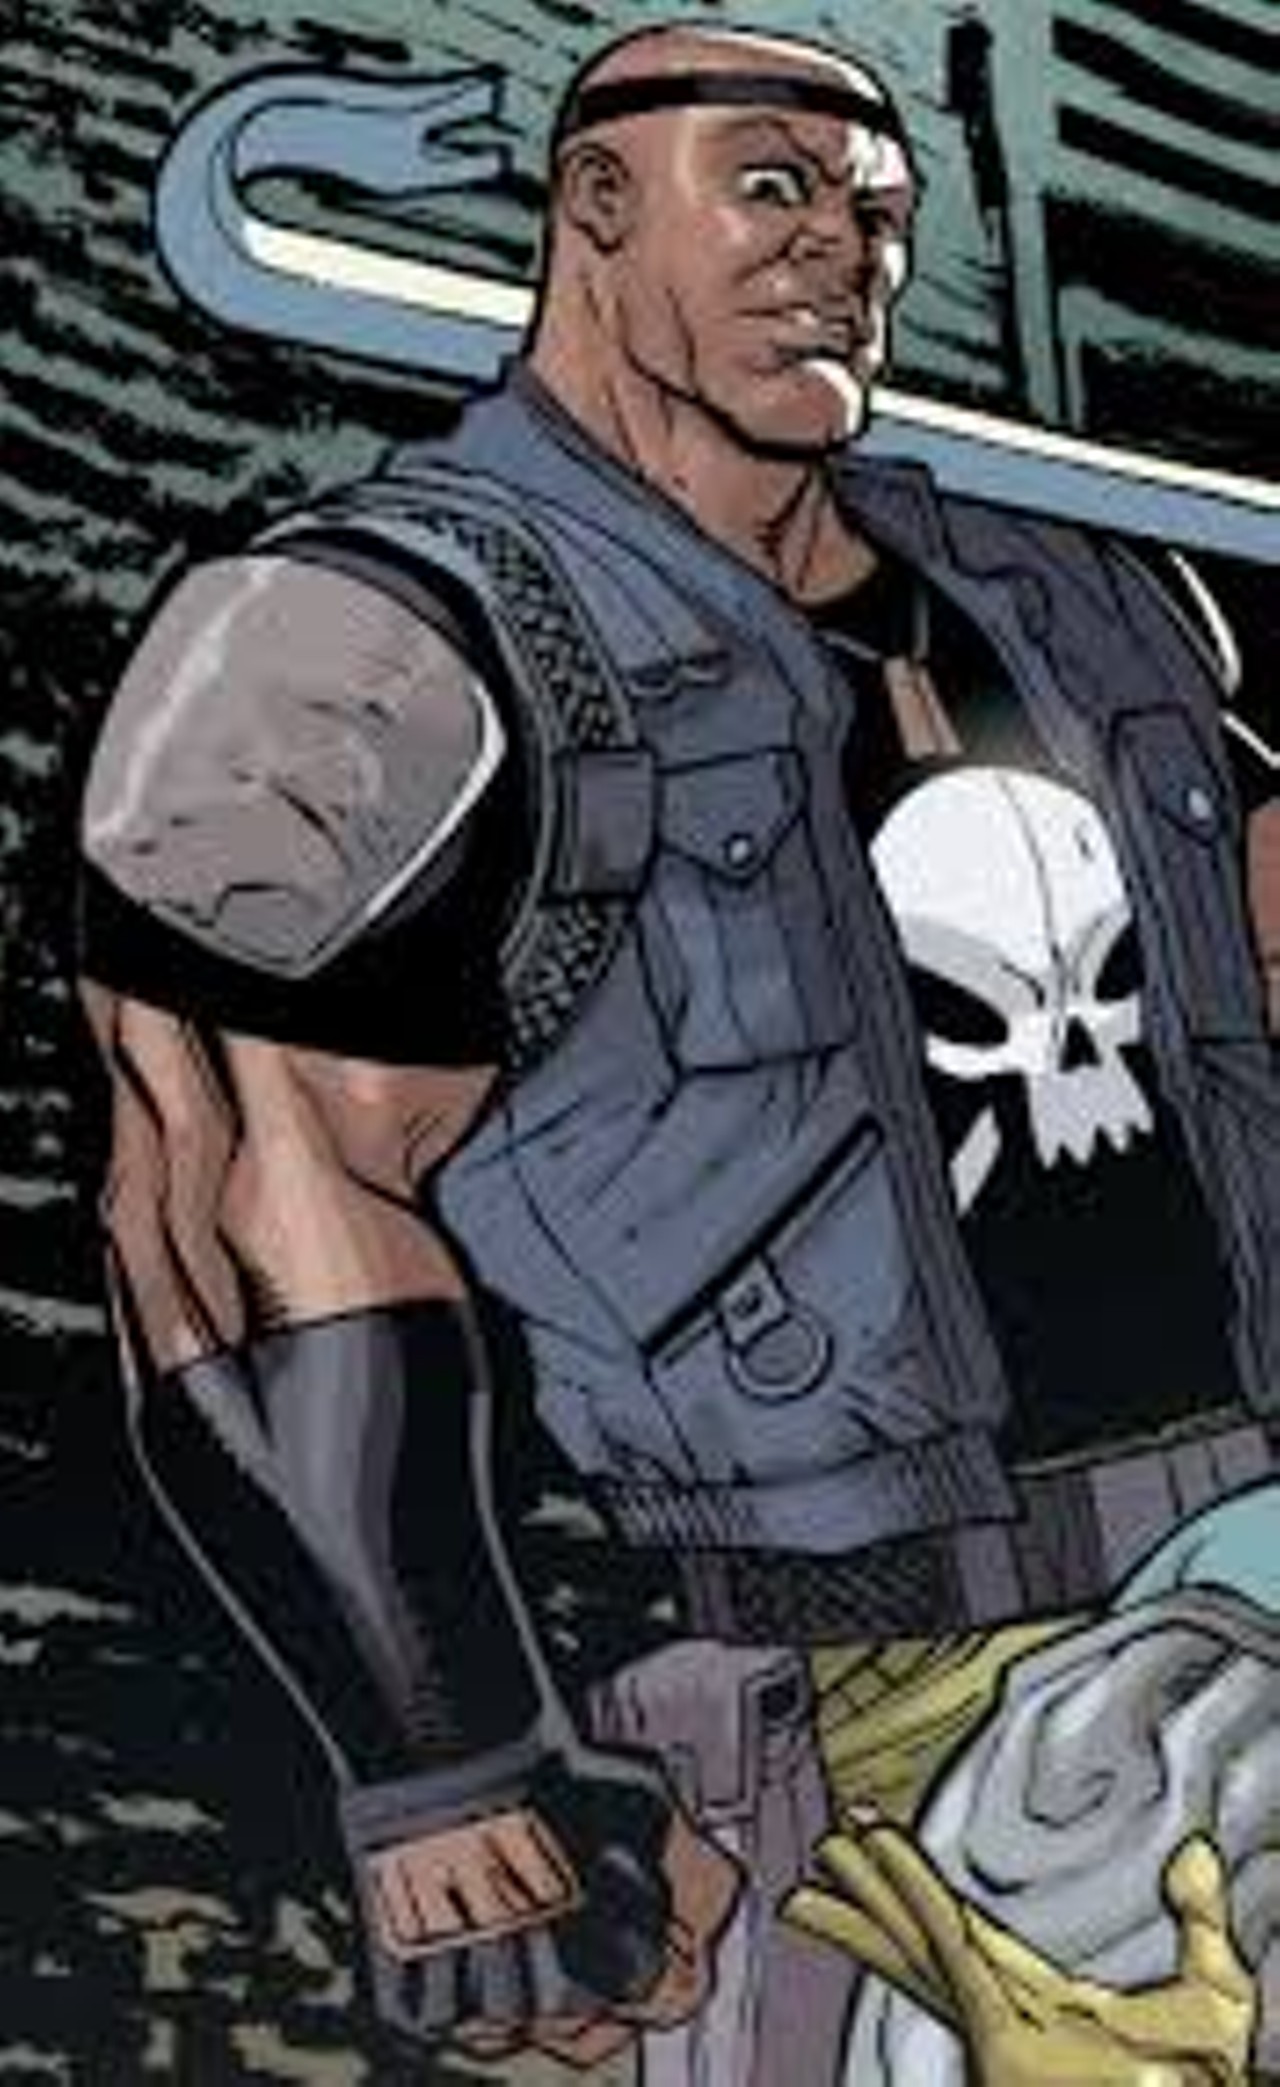 Crowbar
Supervillain Crowbar is actually Malcolm Tandy, a Detroit gang member who liked to rough people up with his namesake weapon. When the Overmaster (cosmic badass) infused Crowbar’s crowbar with energy, Tandy became a thorn in the Justice League’s side.